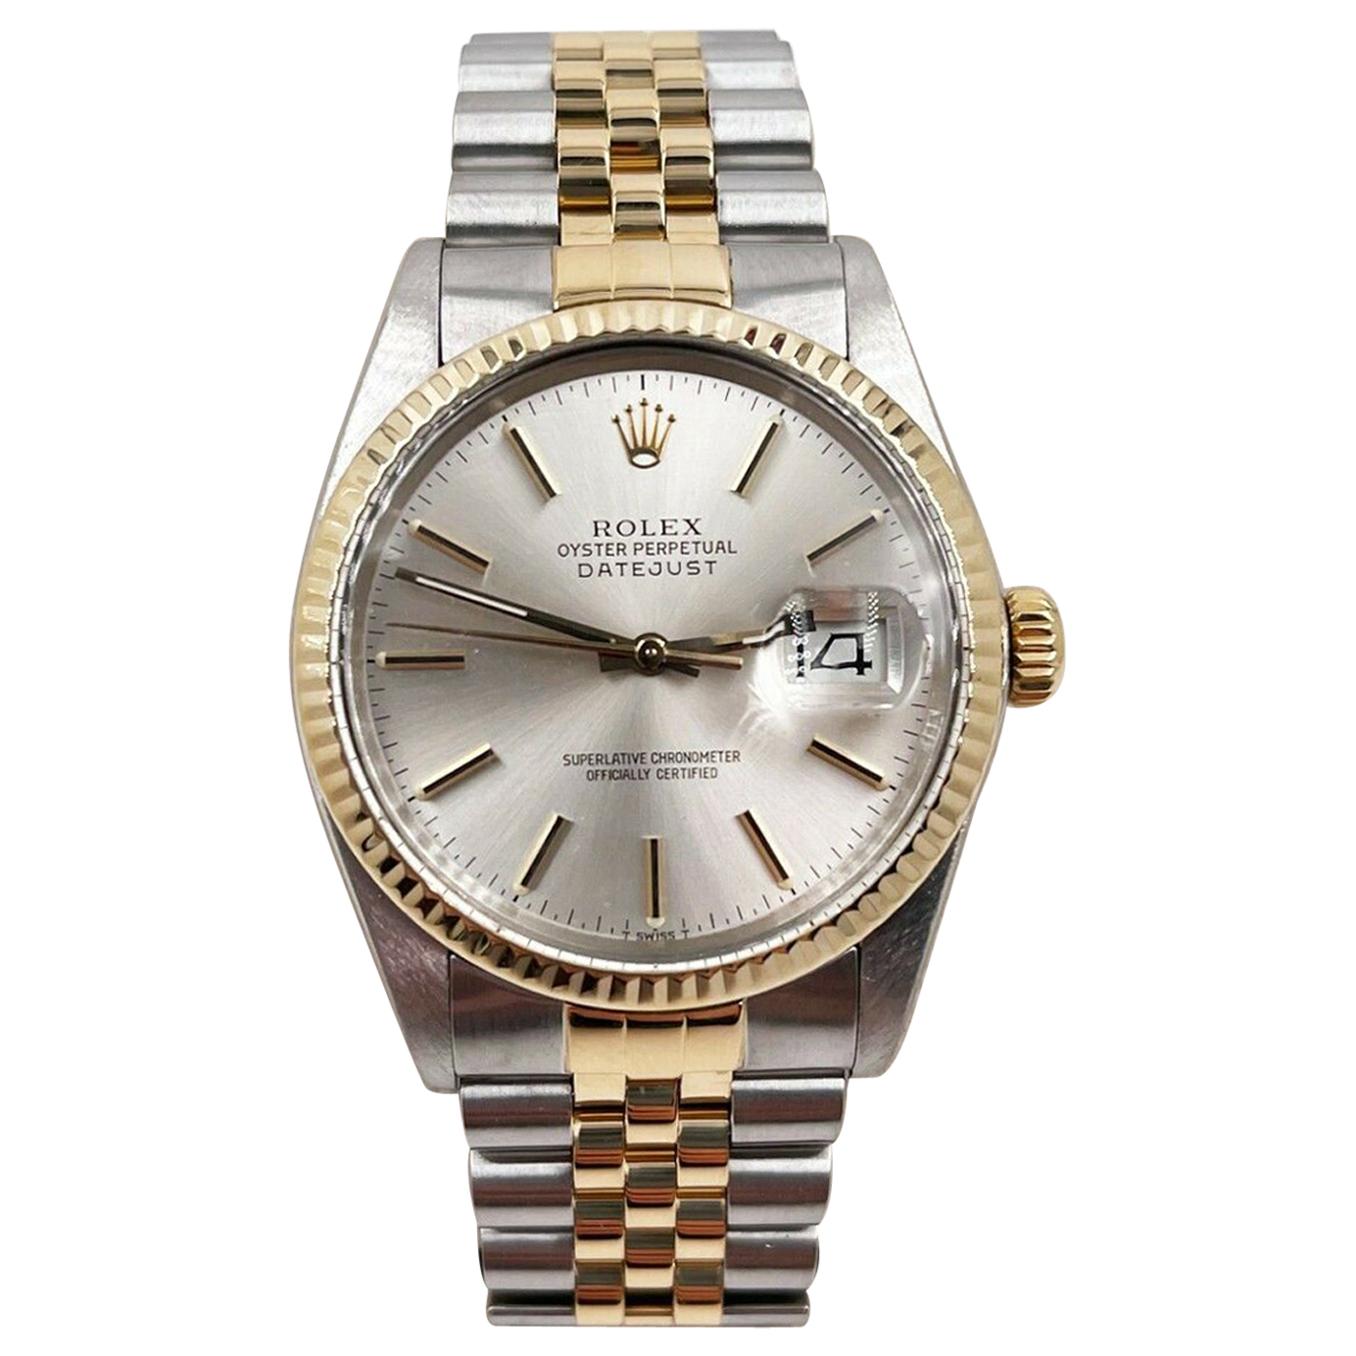 Rolex 16253 Datejust Silver Dial 18 Karat Yellow Gold Stainless Steel with Box